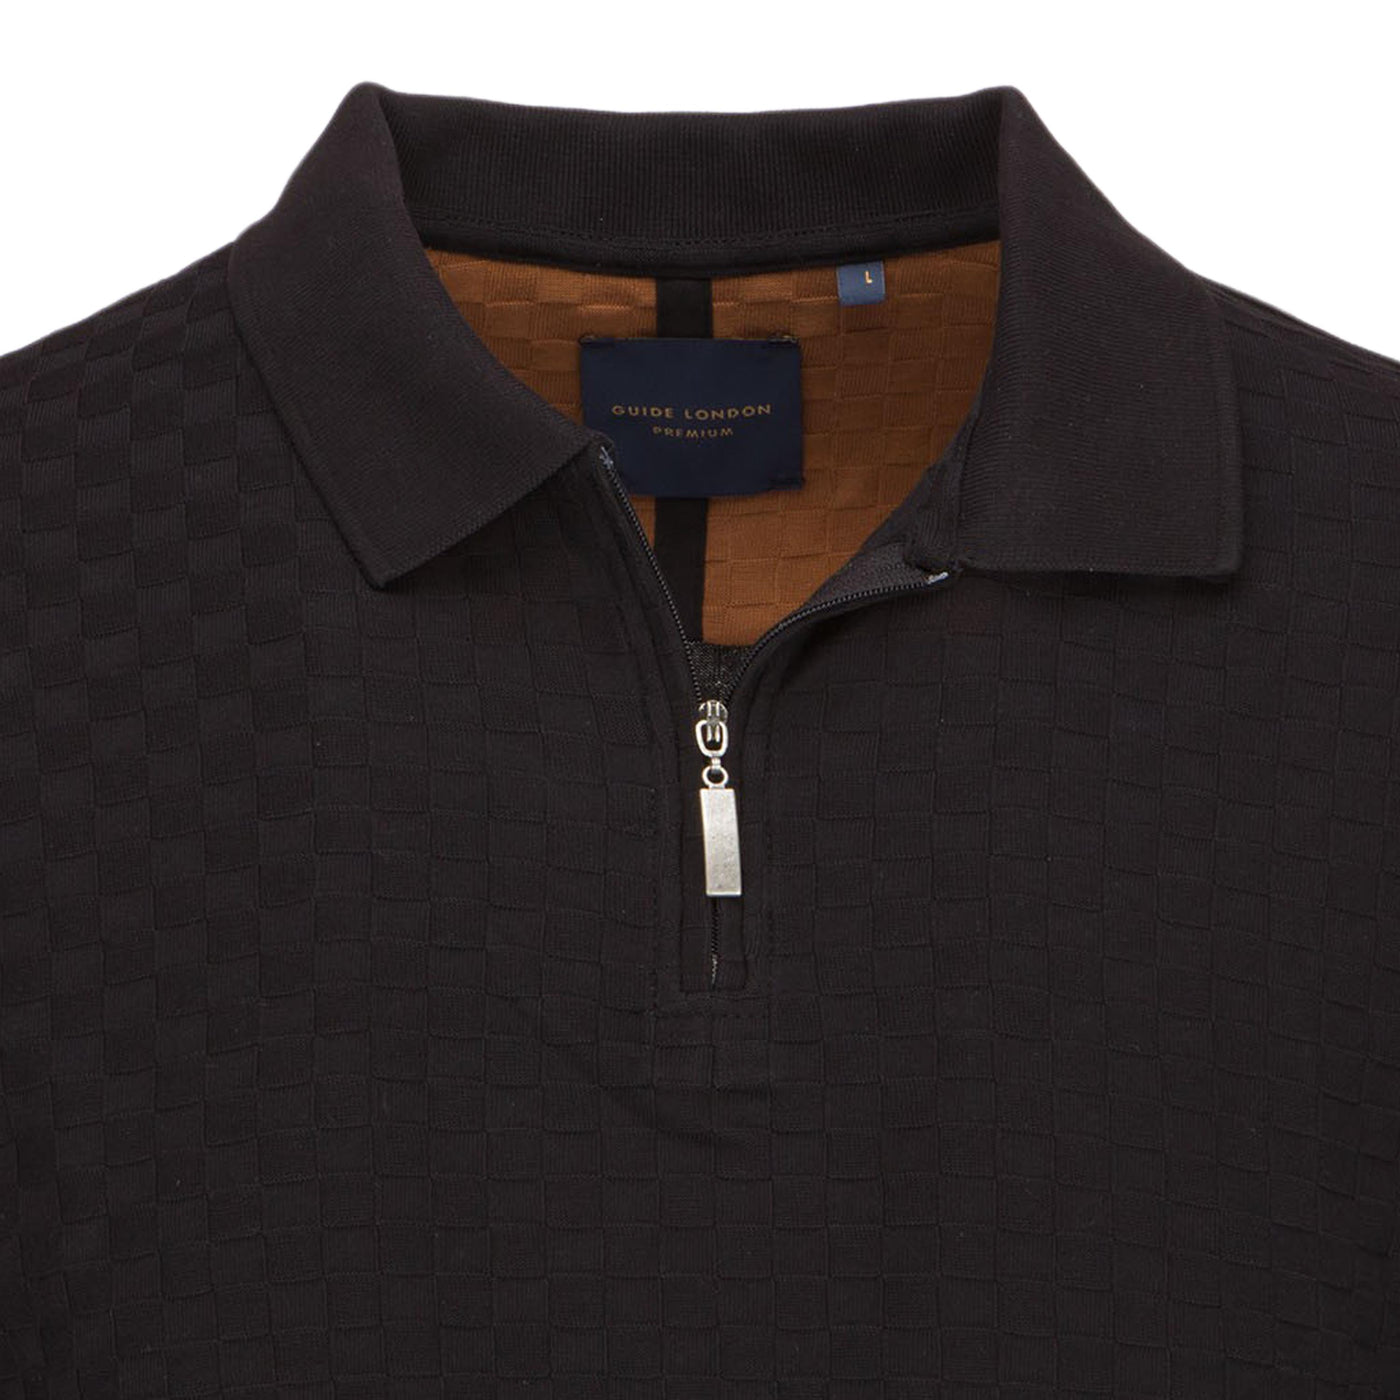 Long Sleeve Zip Knitted Polo